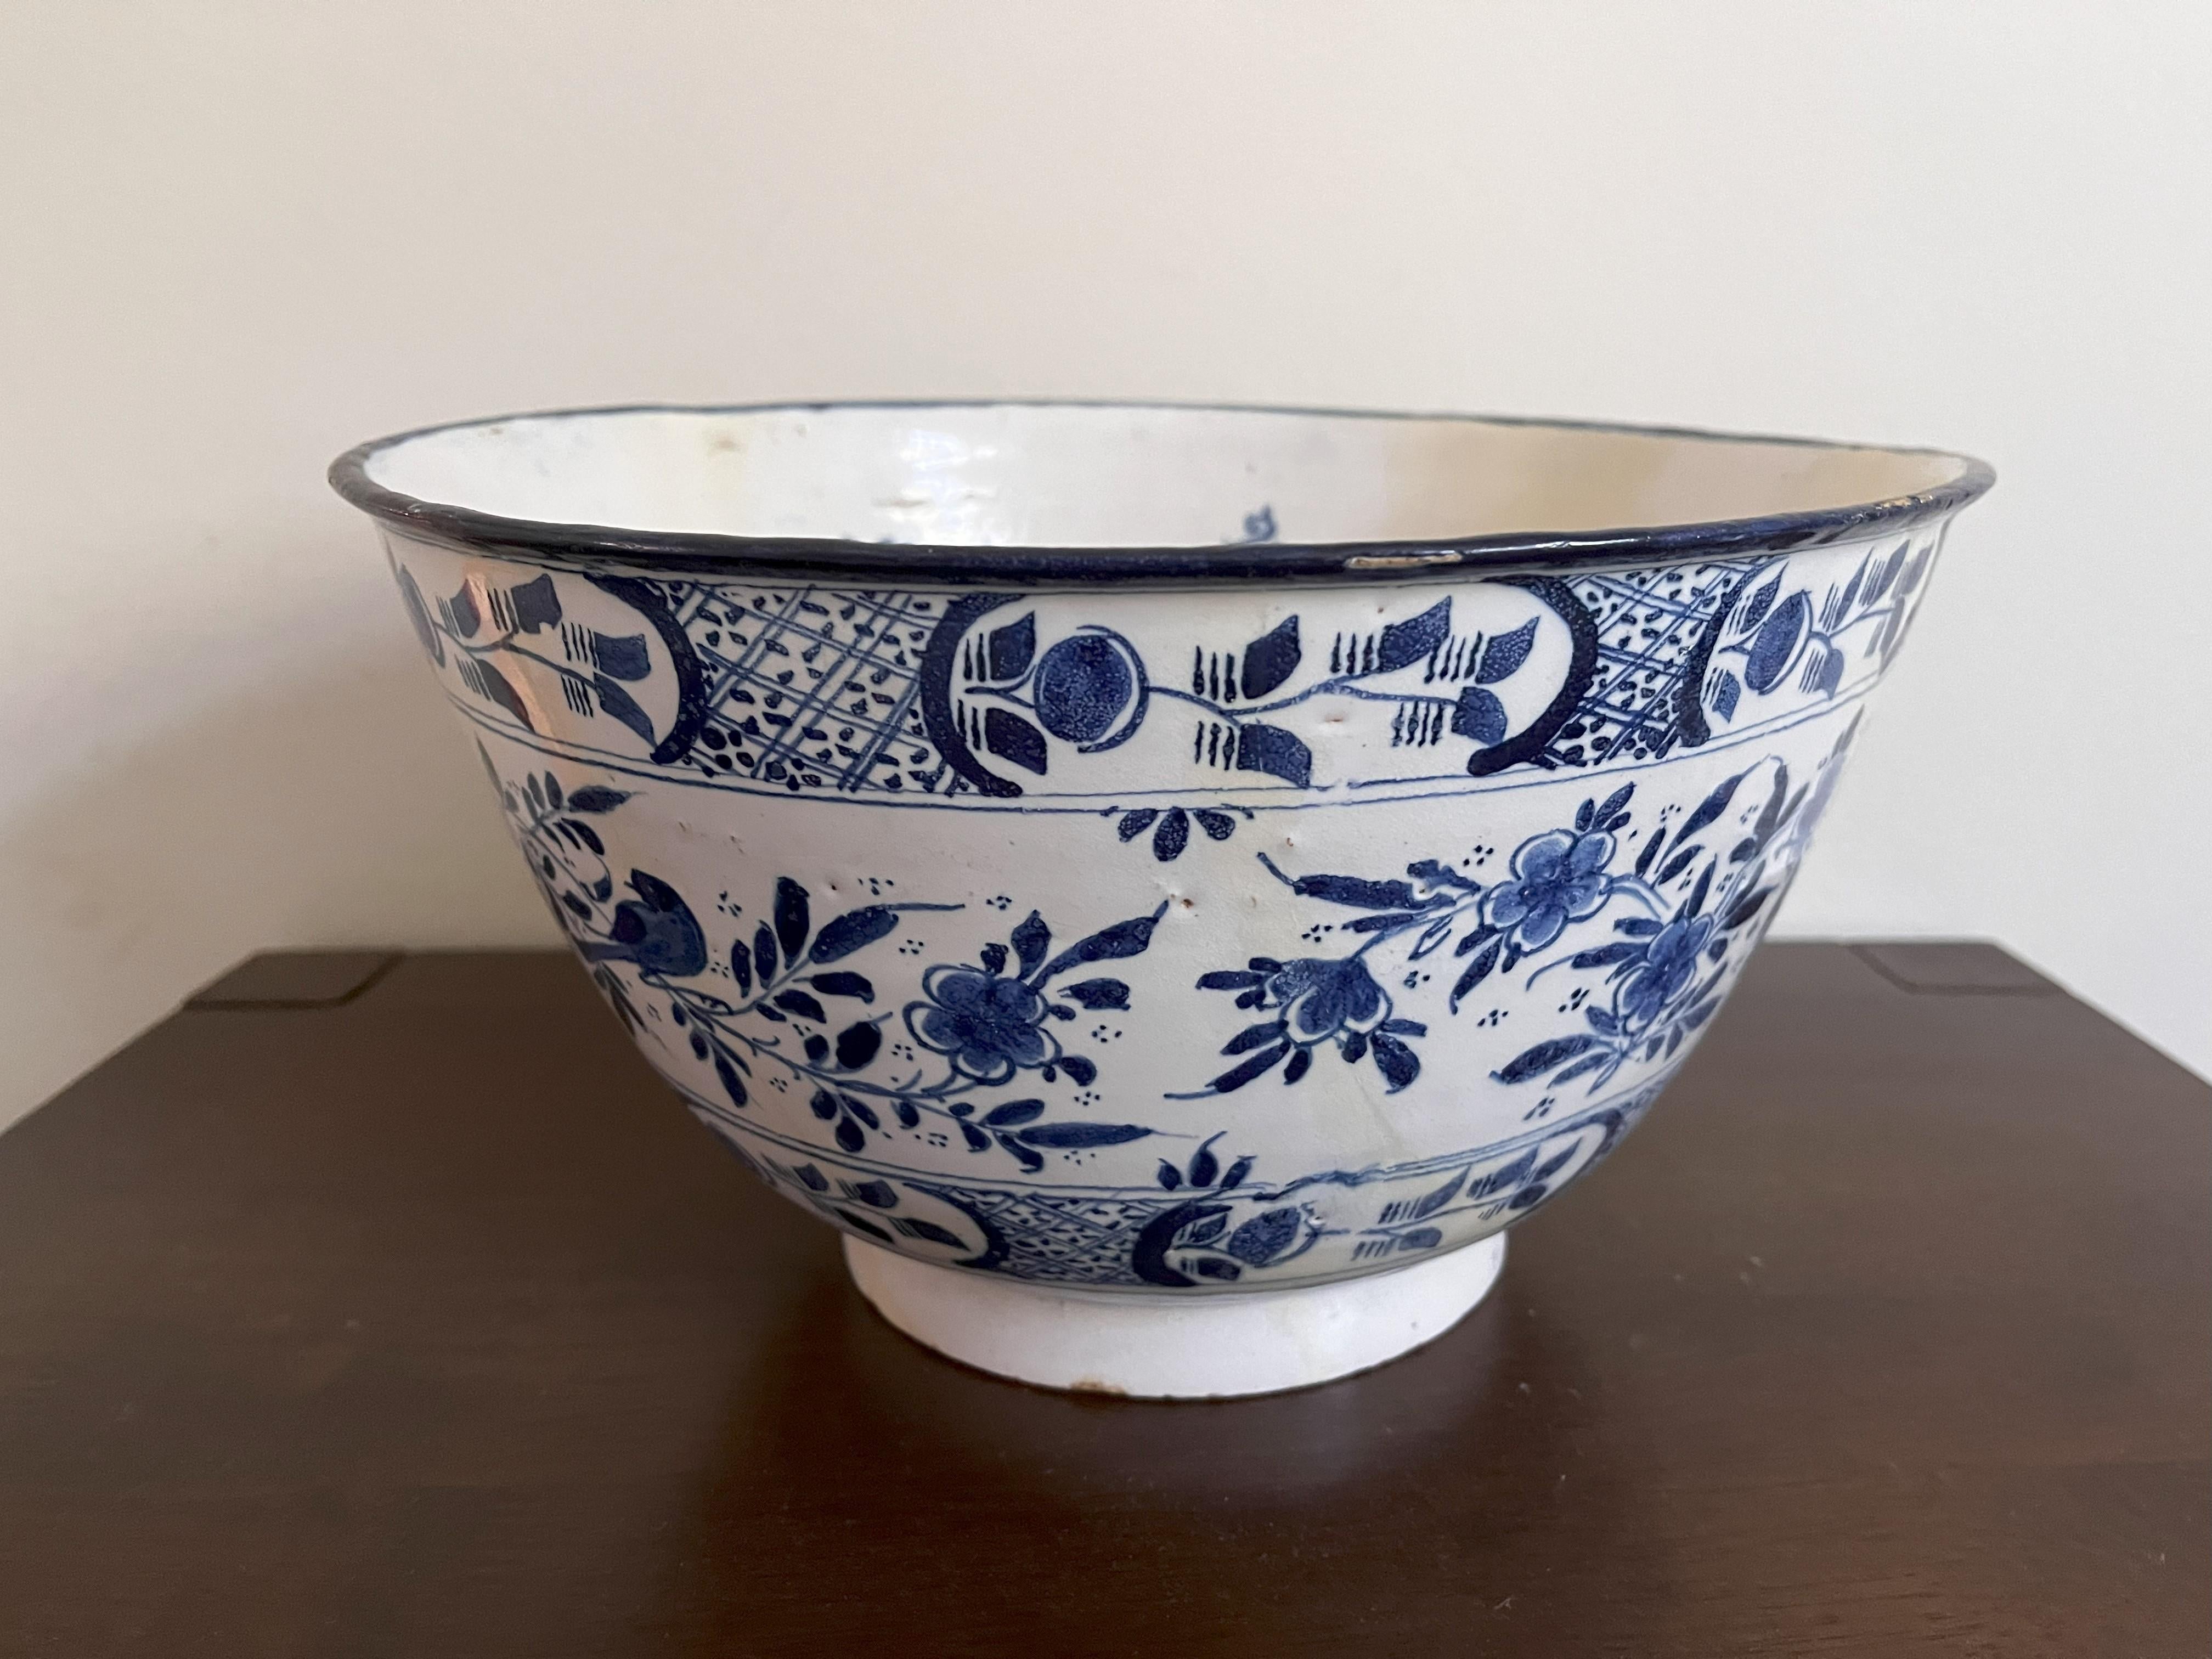 A large antique Blue and White Delft punch bowl made in 1727. Probably made in Bristol, England due to extensive flowery decoration, this bowl is marked with the decorators initials 